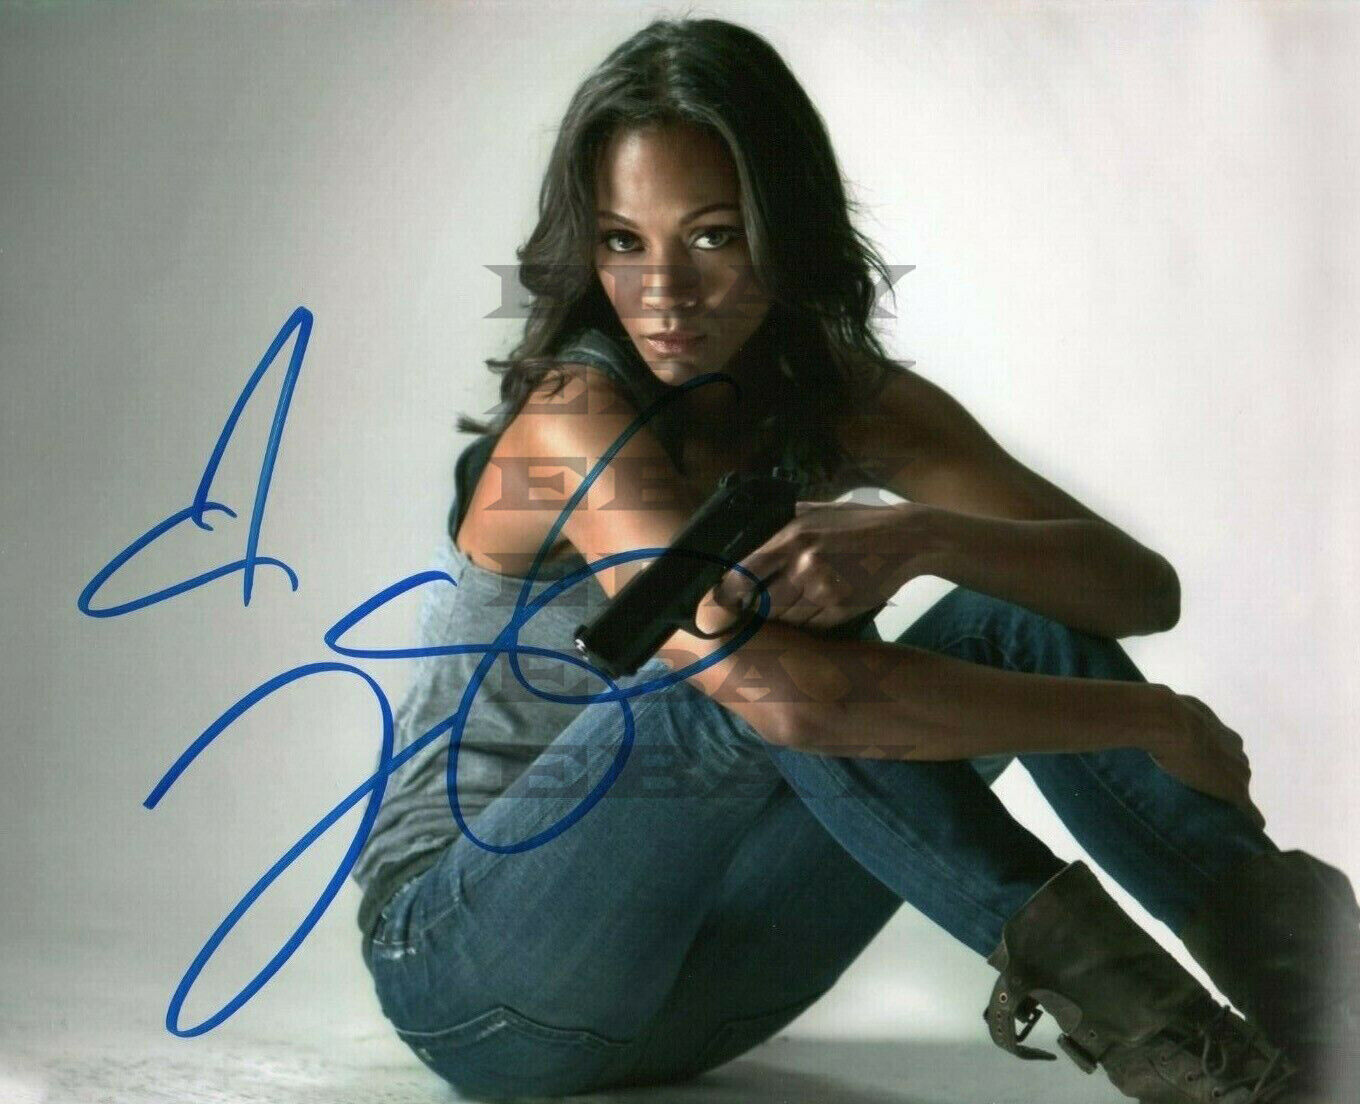 Zoe Saldana Law and Order Autographed 8x10 Photo Poster painting Signed REPRINT